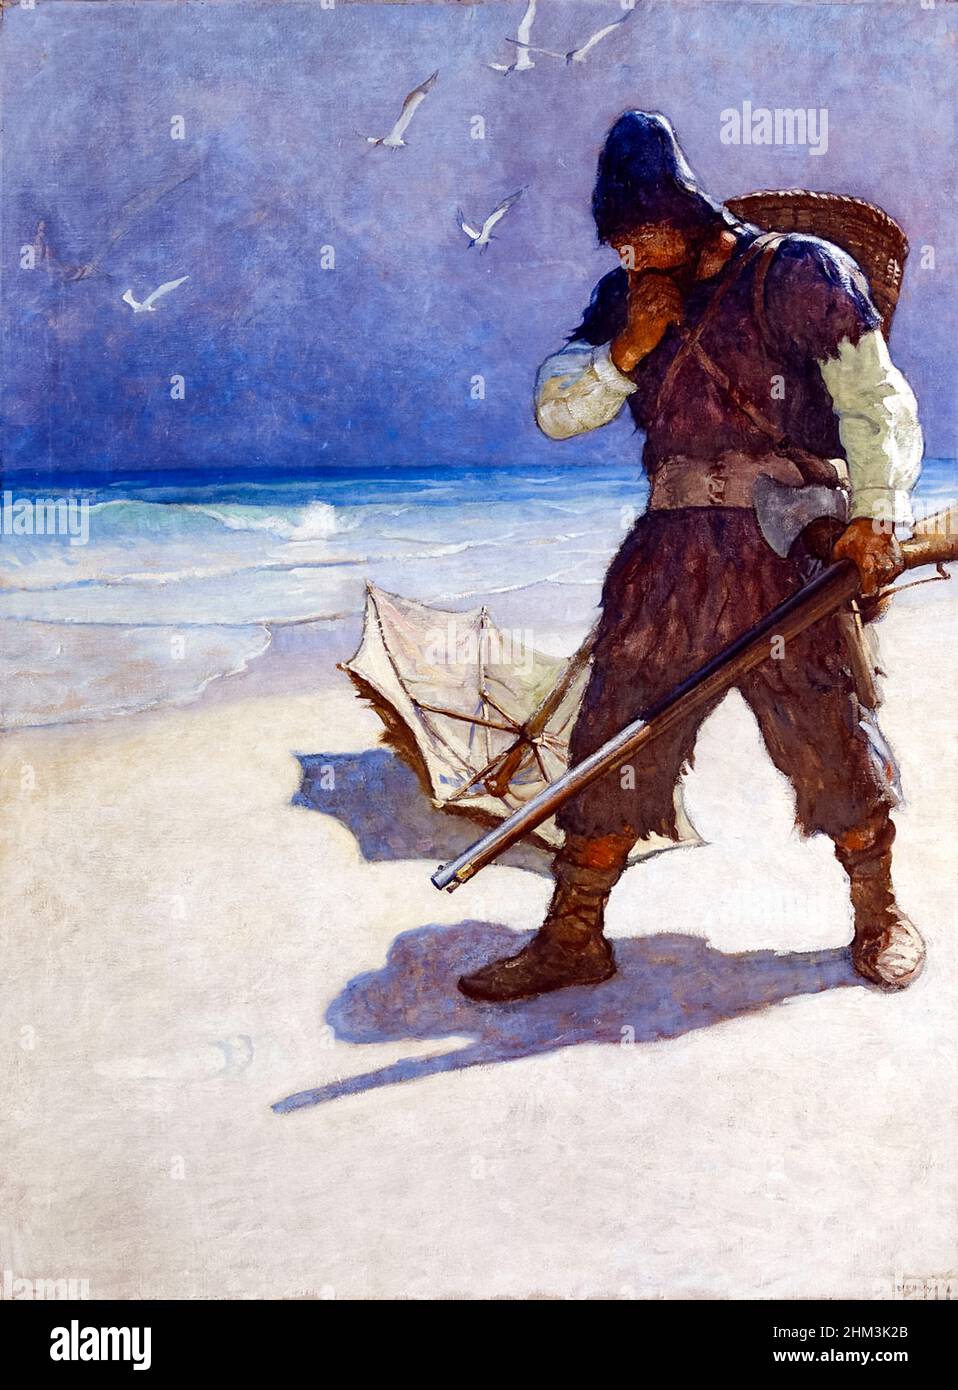 “I Stood Like One Thunderstruck, or As if I Had Seen an Apparition” from “The Life and Strange Surprising Adventures of Robinson Crusoe, or York, Mariner” by Daniel Defoe (1660-1731) showing the moment Crusoe discovers a footprint. Painting by Newell Convers Wyeth (1882-1945) published in a 1920 edition of the book. Stock Photo